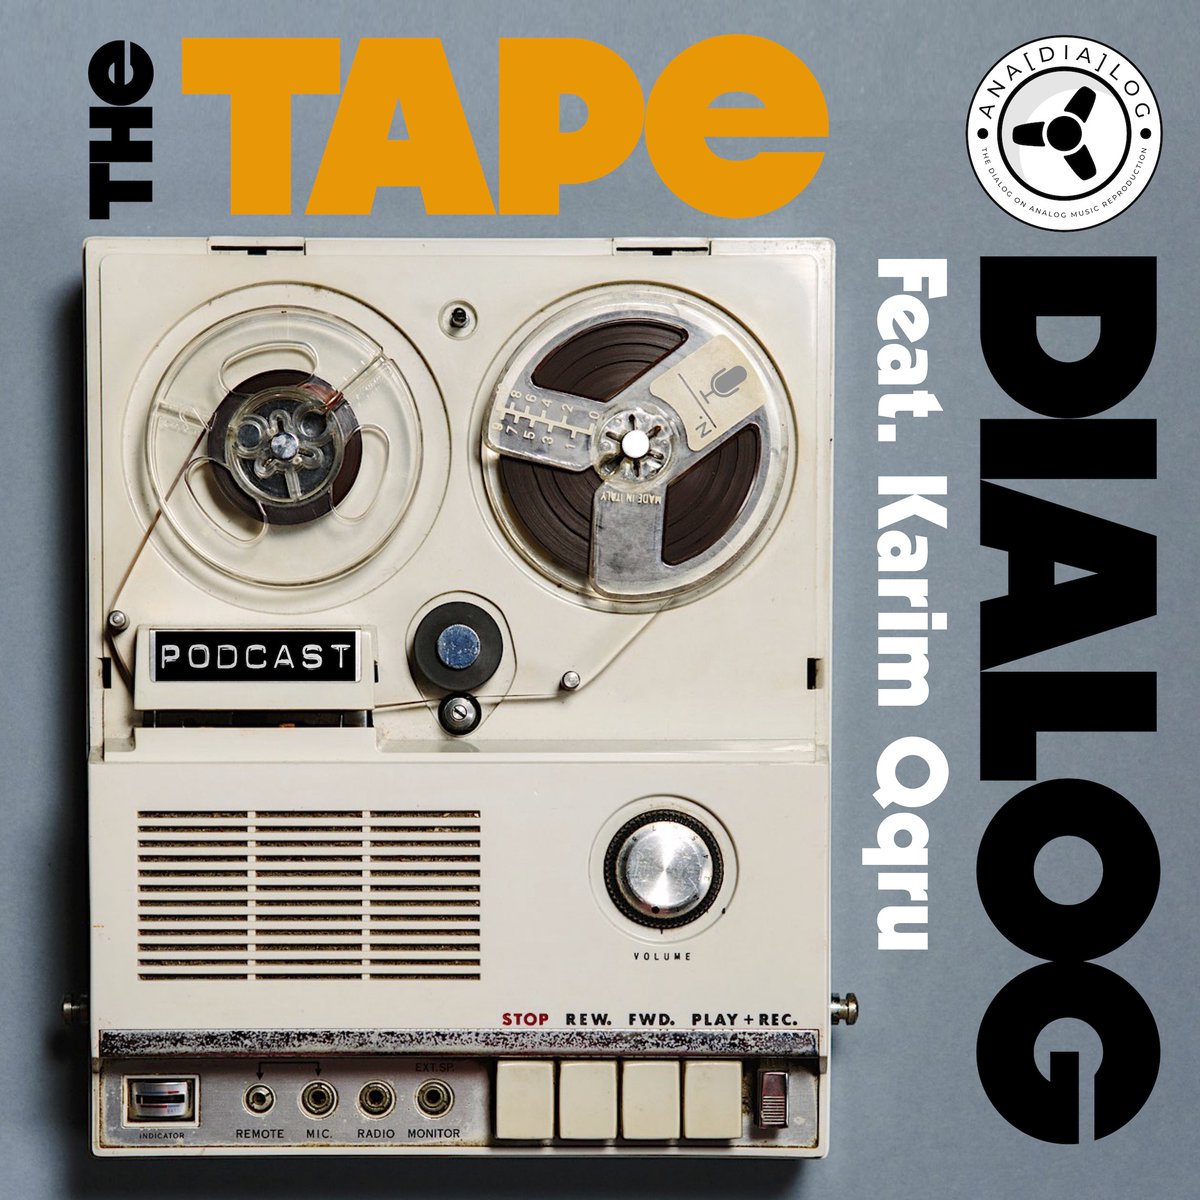 'The Tape Dialog'
A Podcast by Ana[dia]log feat. Karim Qqru
Coming Soon on YouTube!
#podcast #podcasting #analogaudio
#cassette #cassetteculture #karimqqru